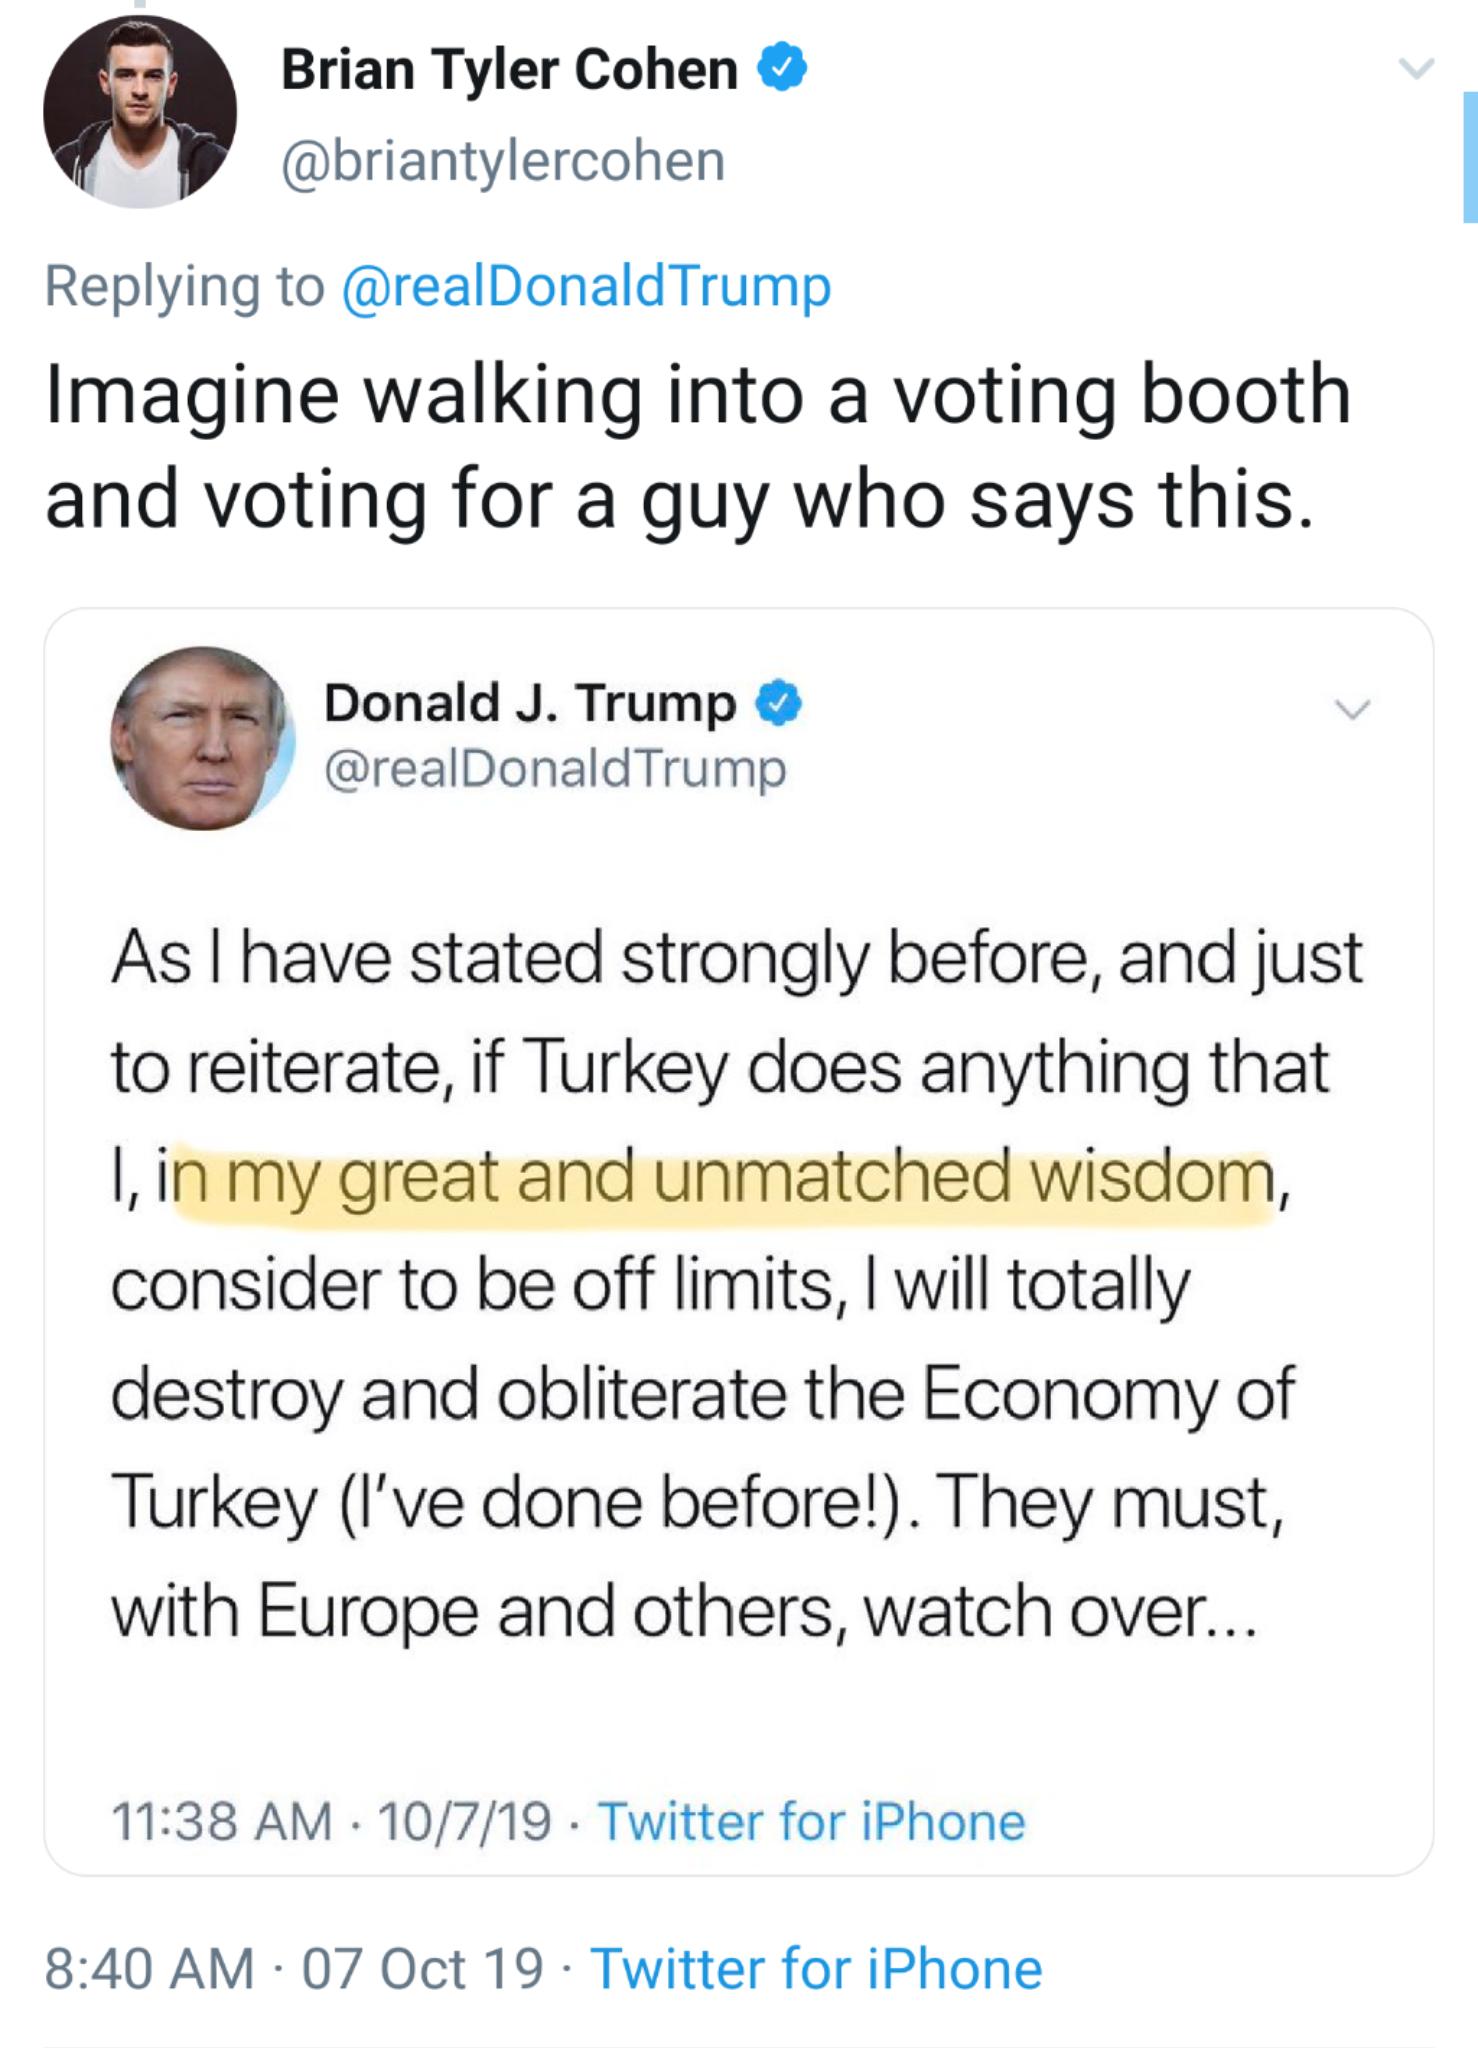 political political-memes political text: Brian Tyler Cohen @briantylercohen Replying to @realDonaldTrump Imagine walking into a voting booth and voting for a guy who says this. Donald J. Trump @realDonaldTrump As I have stated strongly before, and just to reiterate, if Turkey does anything that l, in my great and unmatched wisdom, consider to be off limits, I will totally destroy and obliterate the Economy of Turkey (I've done before!). They must, with Europe and others, watch over... 11:38 AM • 10/7/19 8:40 AM 07 Oct 19 • Twitter for iPhone Twitter for iPhone 